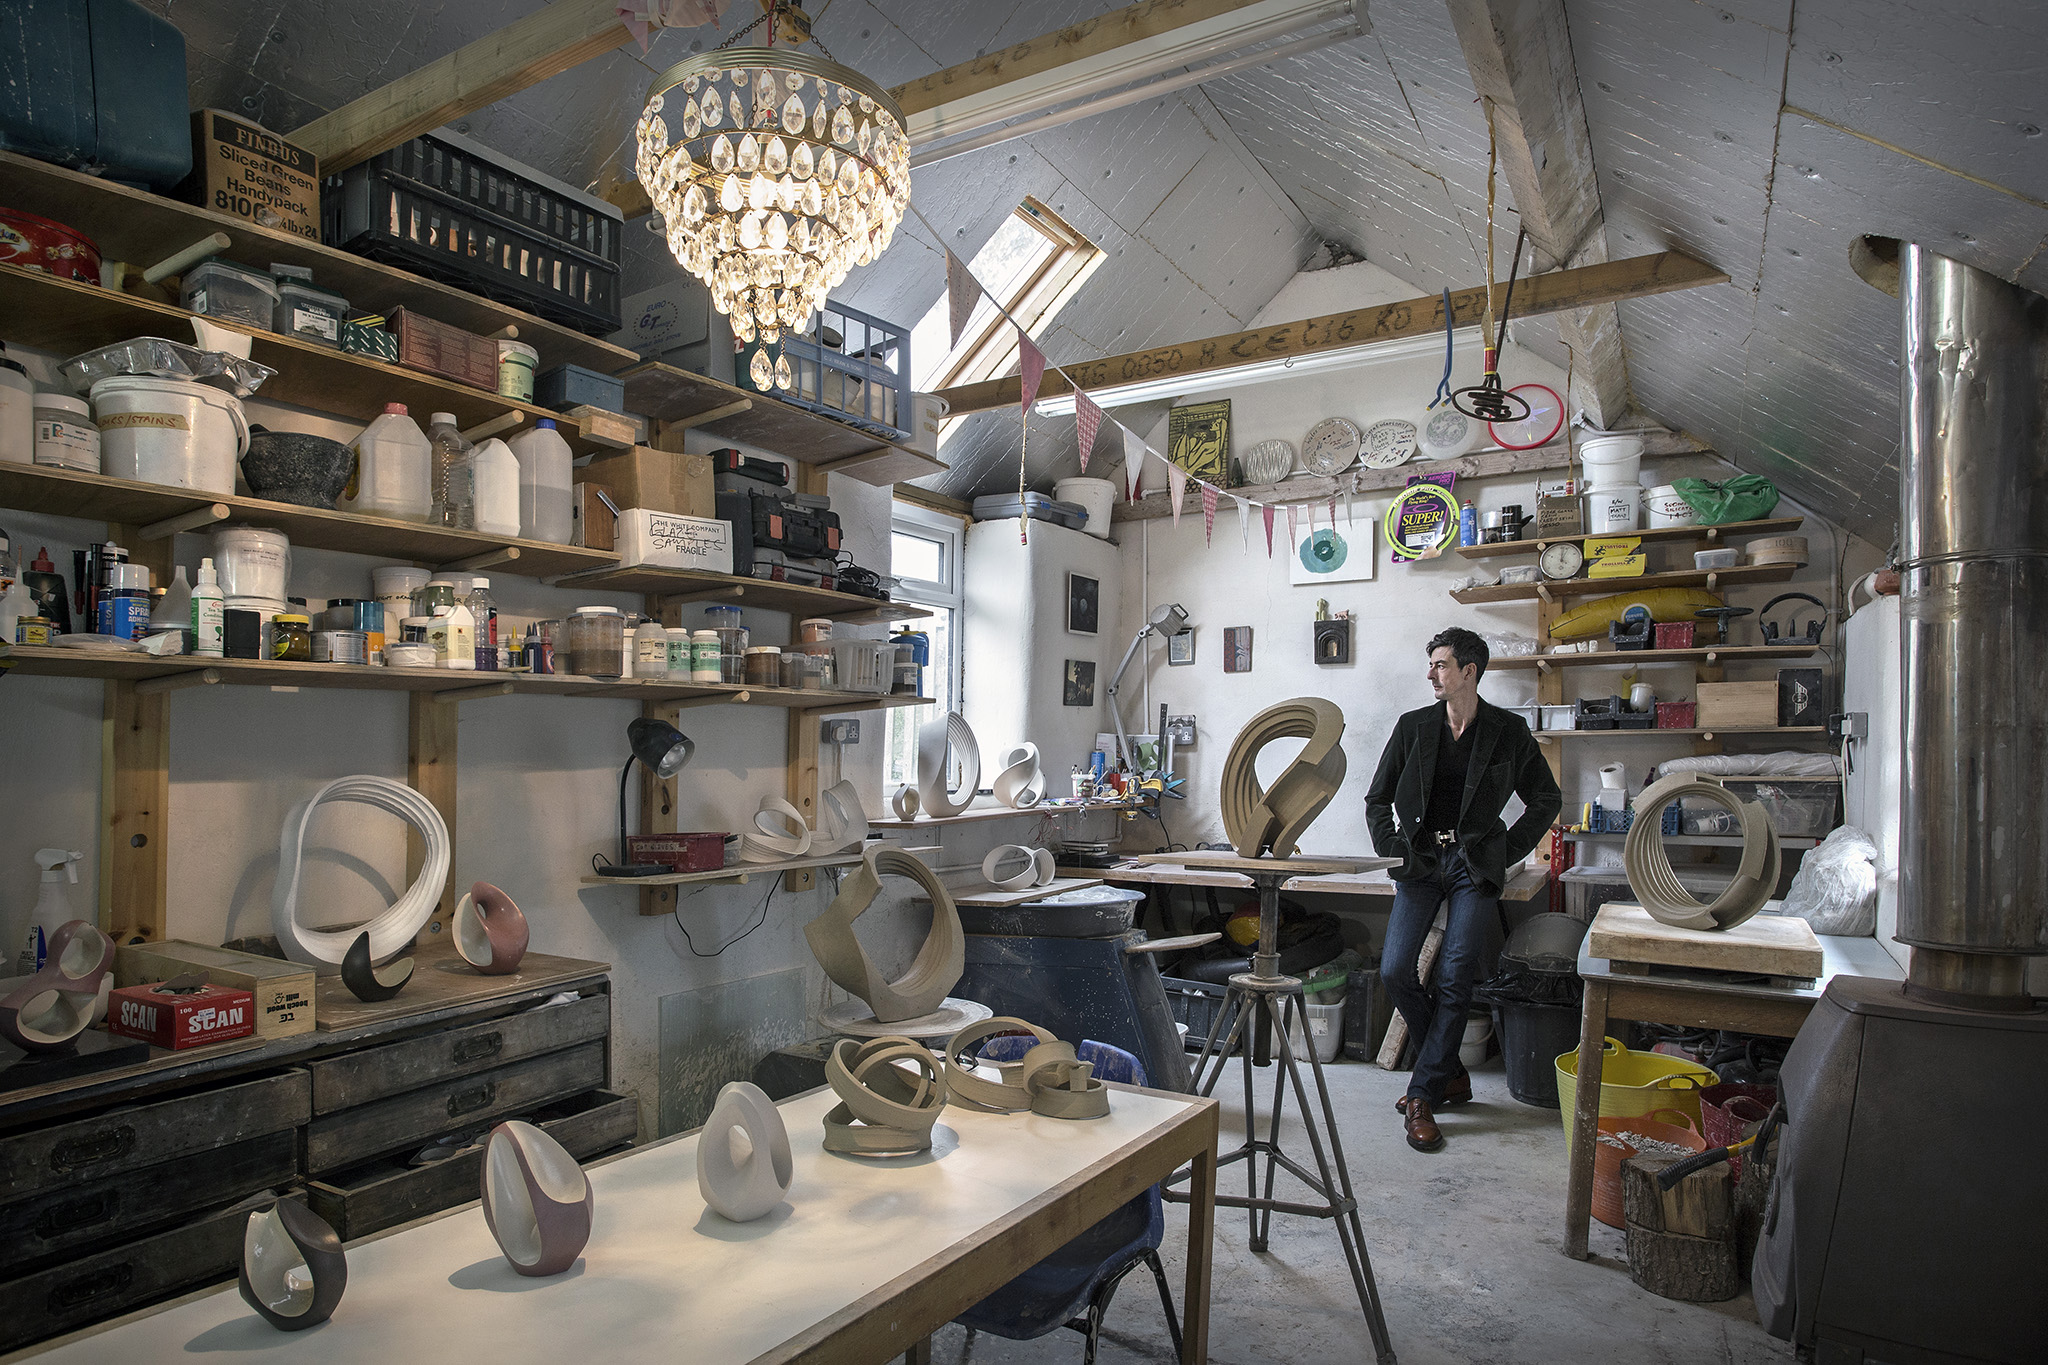 Sculptor Matt Sherratt lined up for Saatchi show with his new works